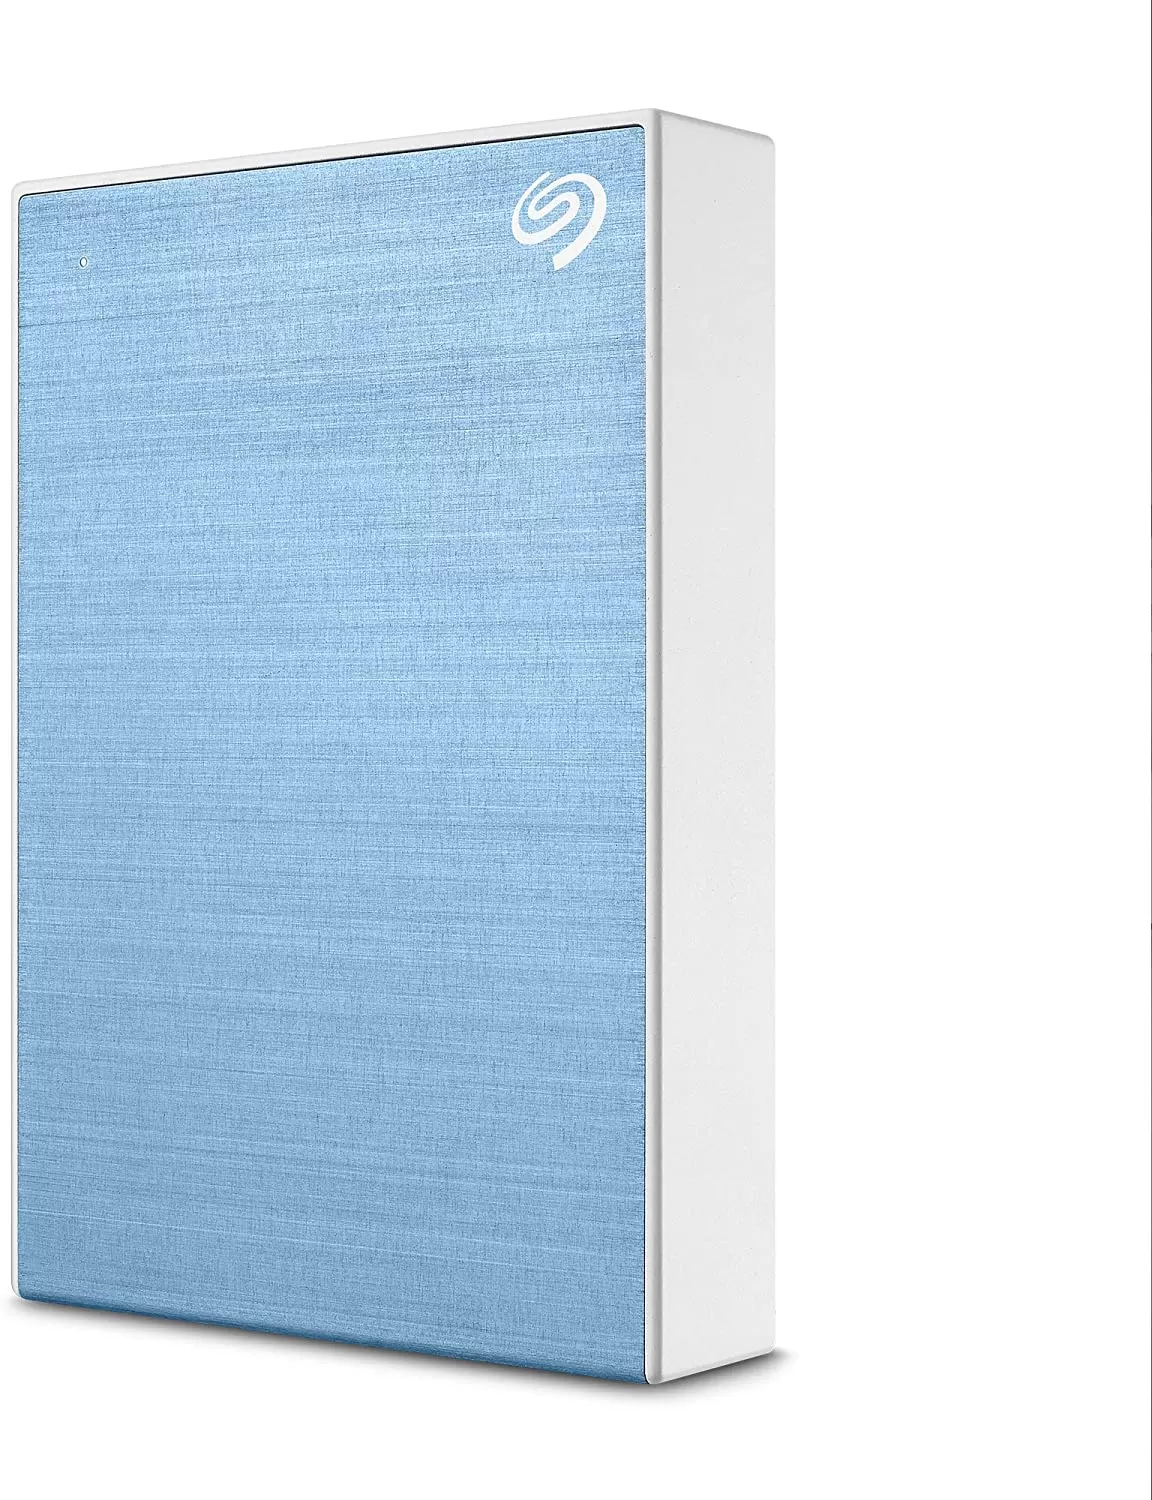 Hard Disk Extern Seagate One Touch 4TB USB 3.0 Light Blue